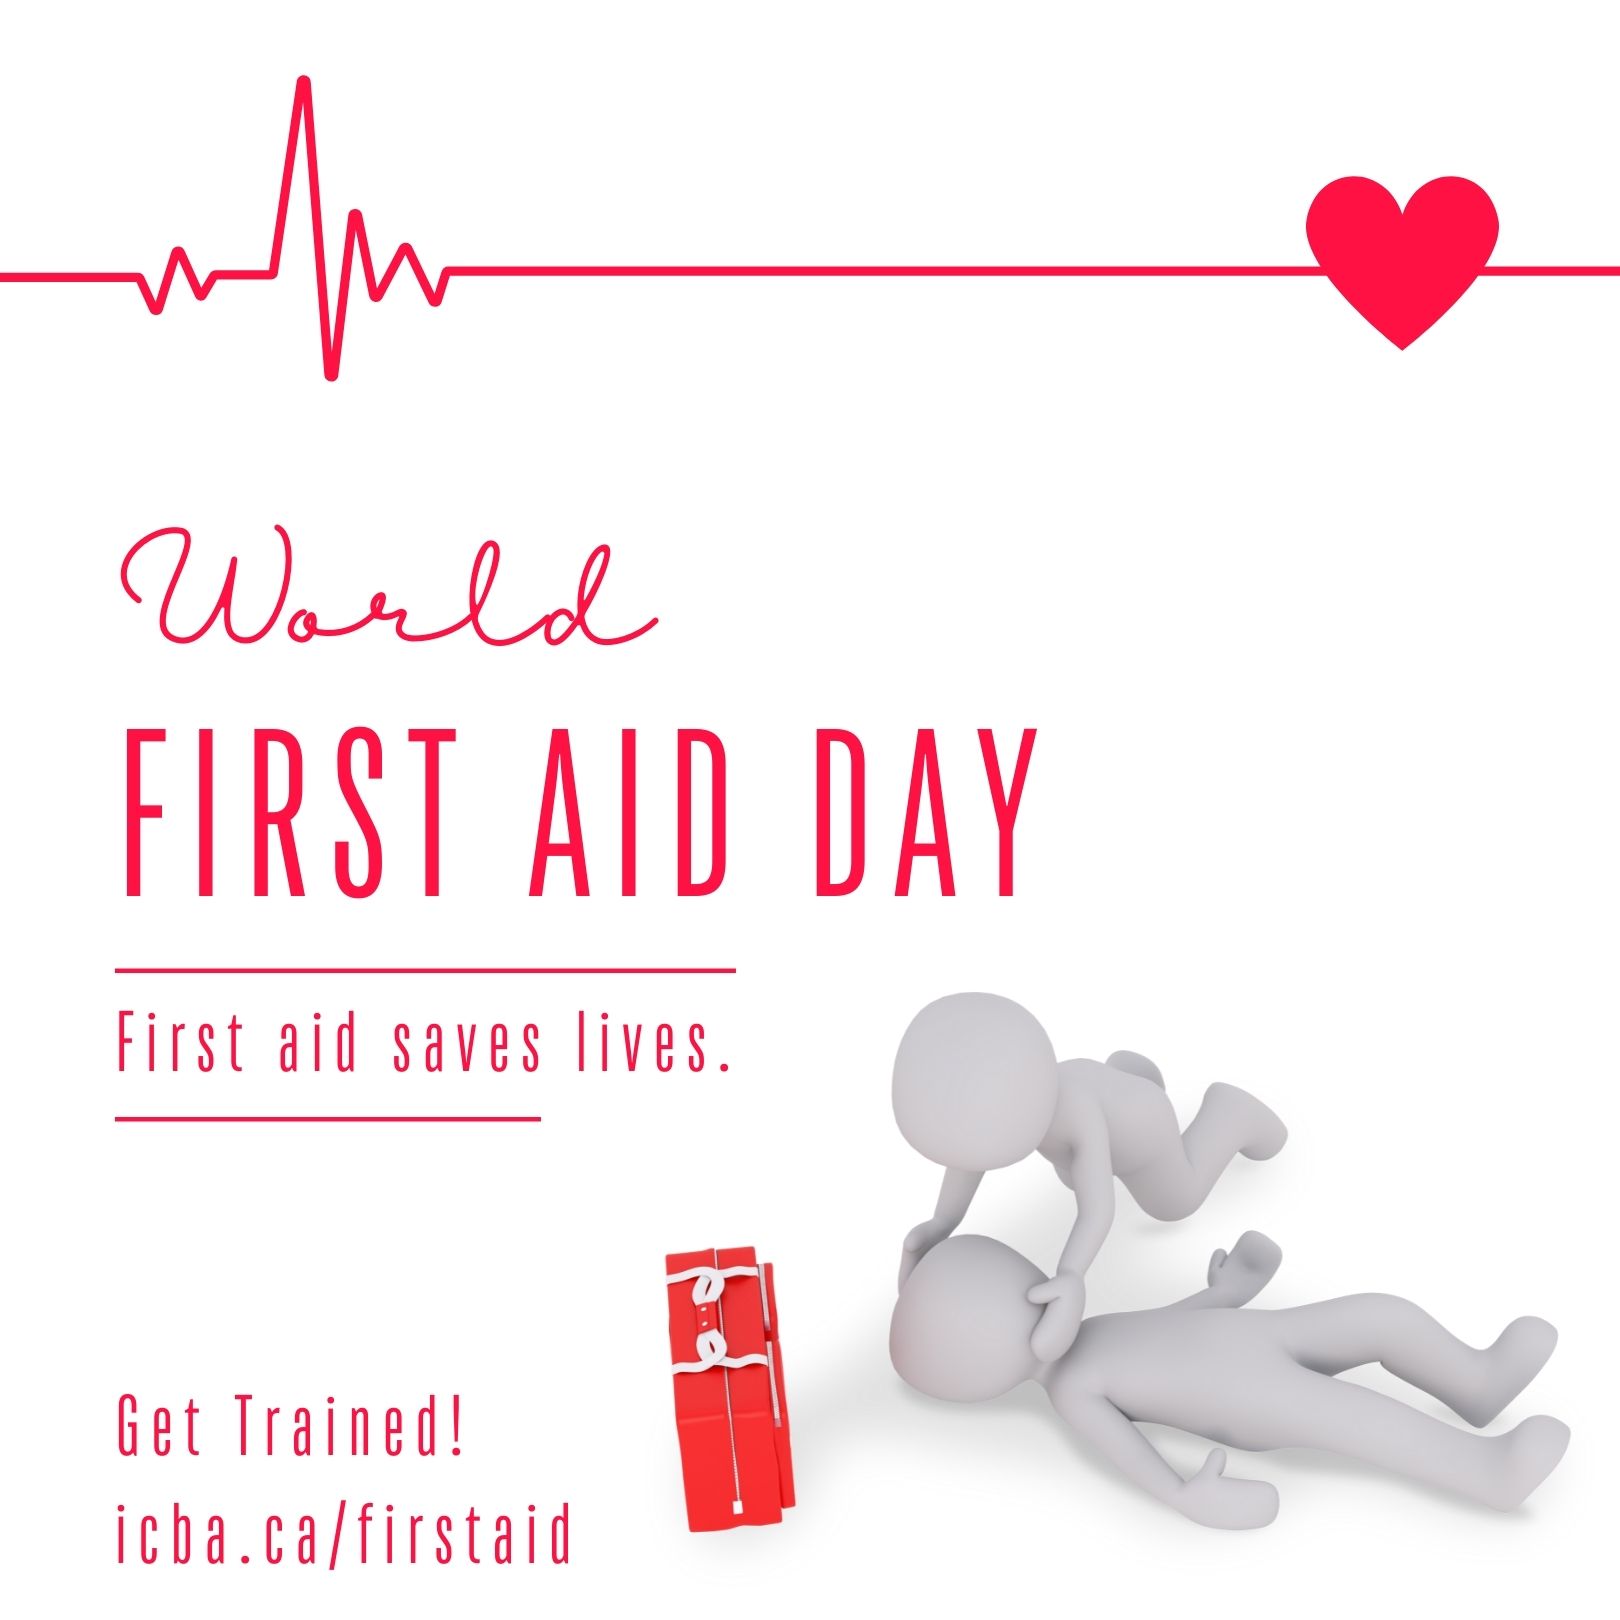 Happy World First Aid Day!